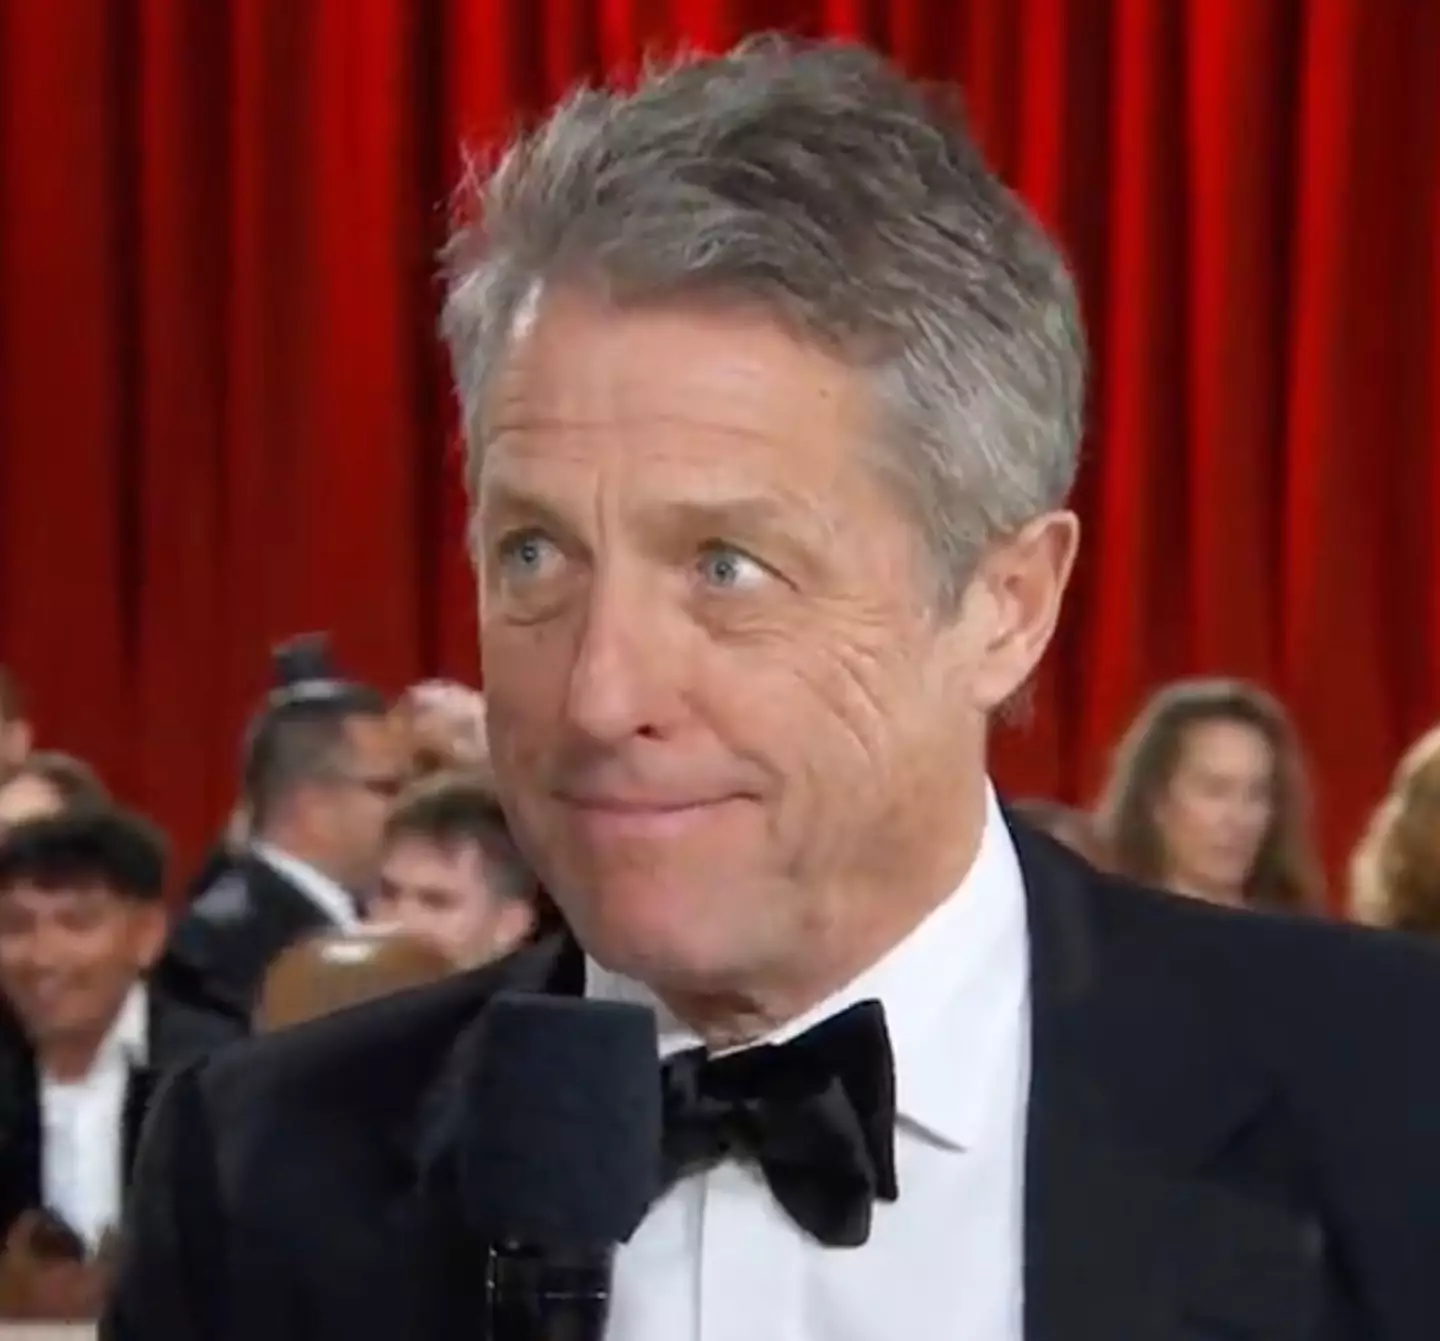 Hugh Grant was really not interested.